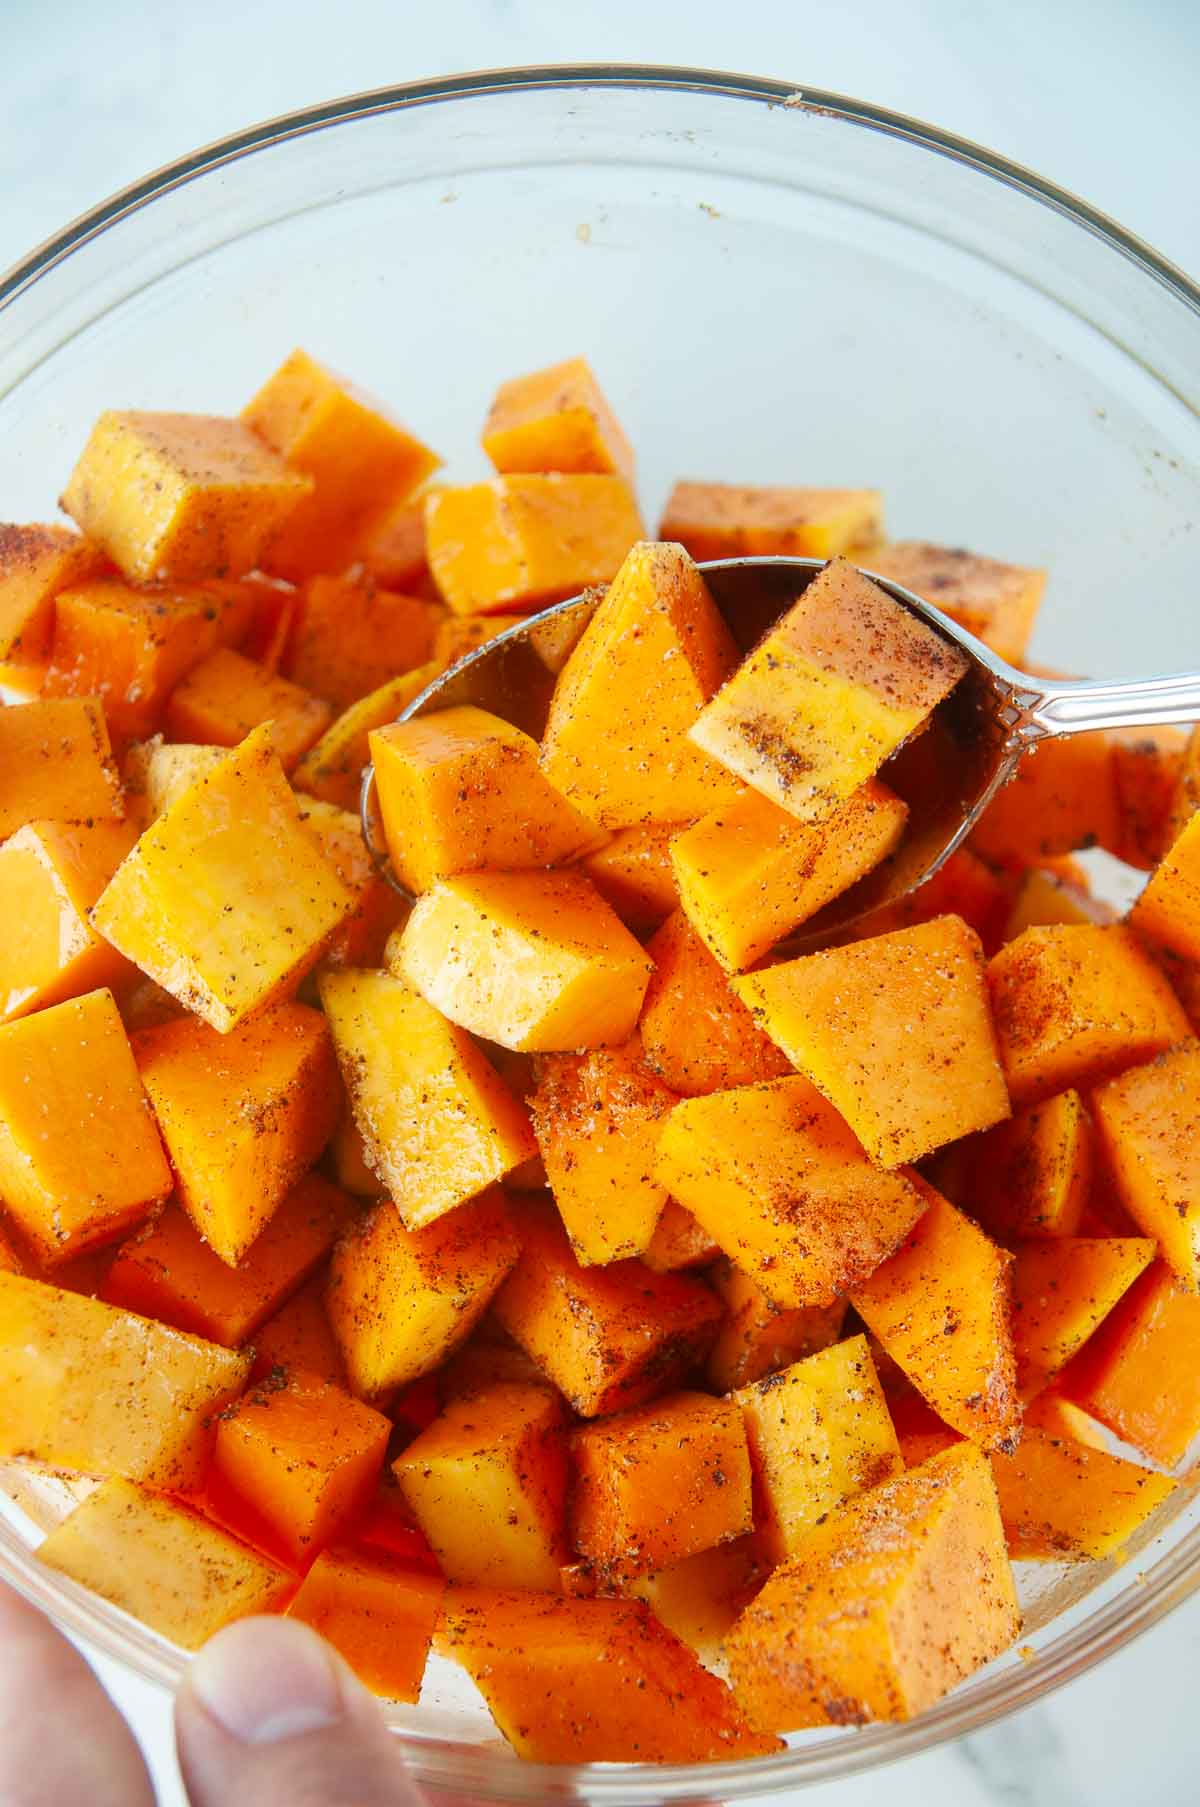 Toss the cut butternut squash with olive oil and seasoning.